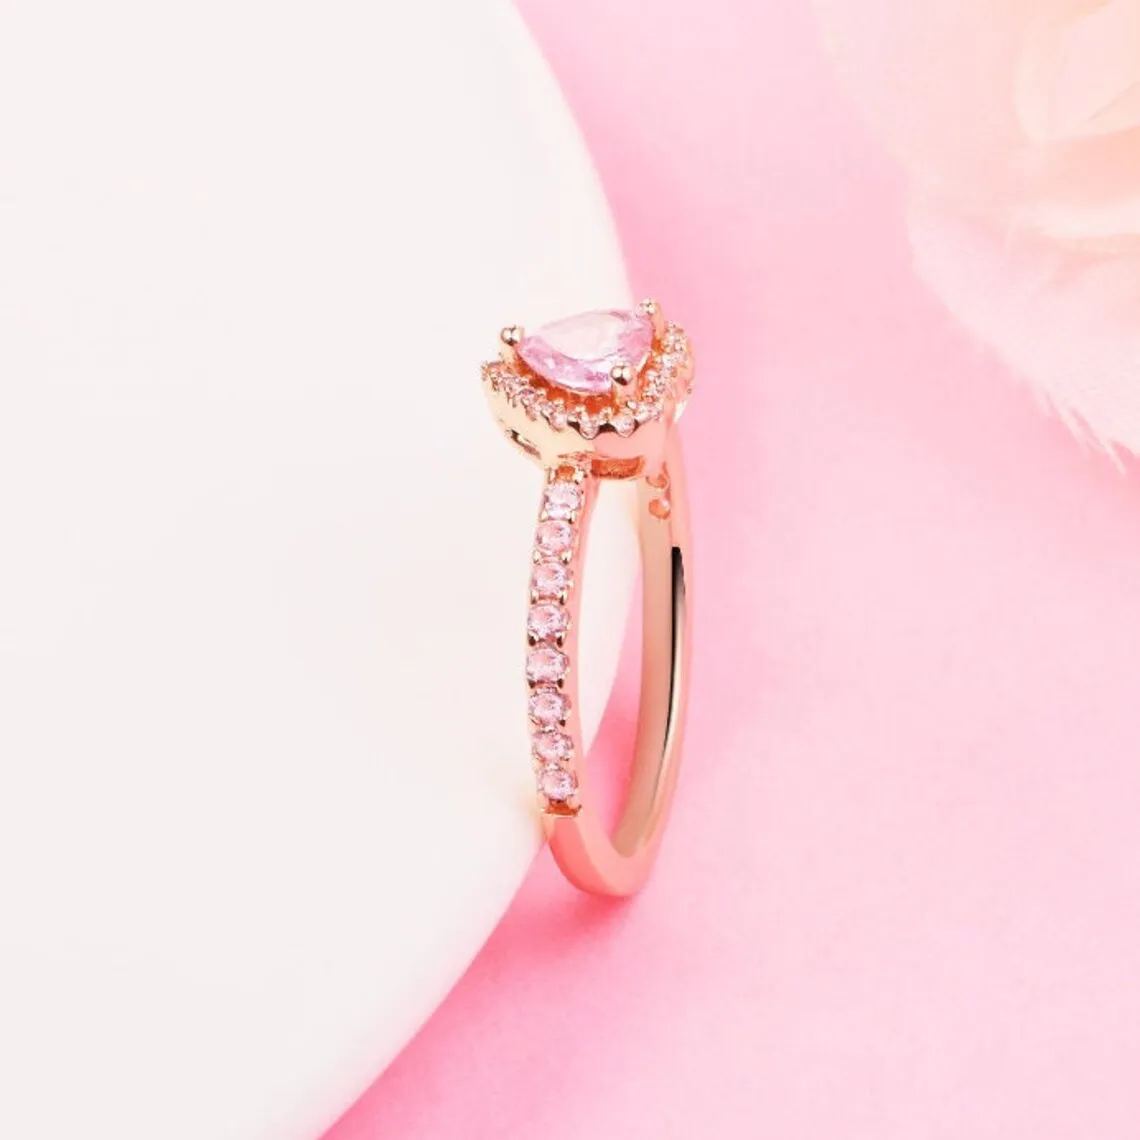 Rose Gold Plated Sparkling Pink Elevated Heart Ring Fit Pandora Jewelry Compromiso Amantes de la boda Anillo de moda para mujeres